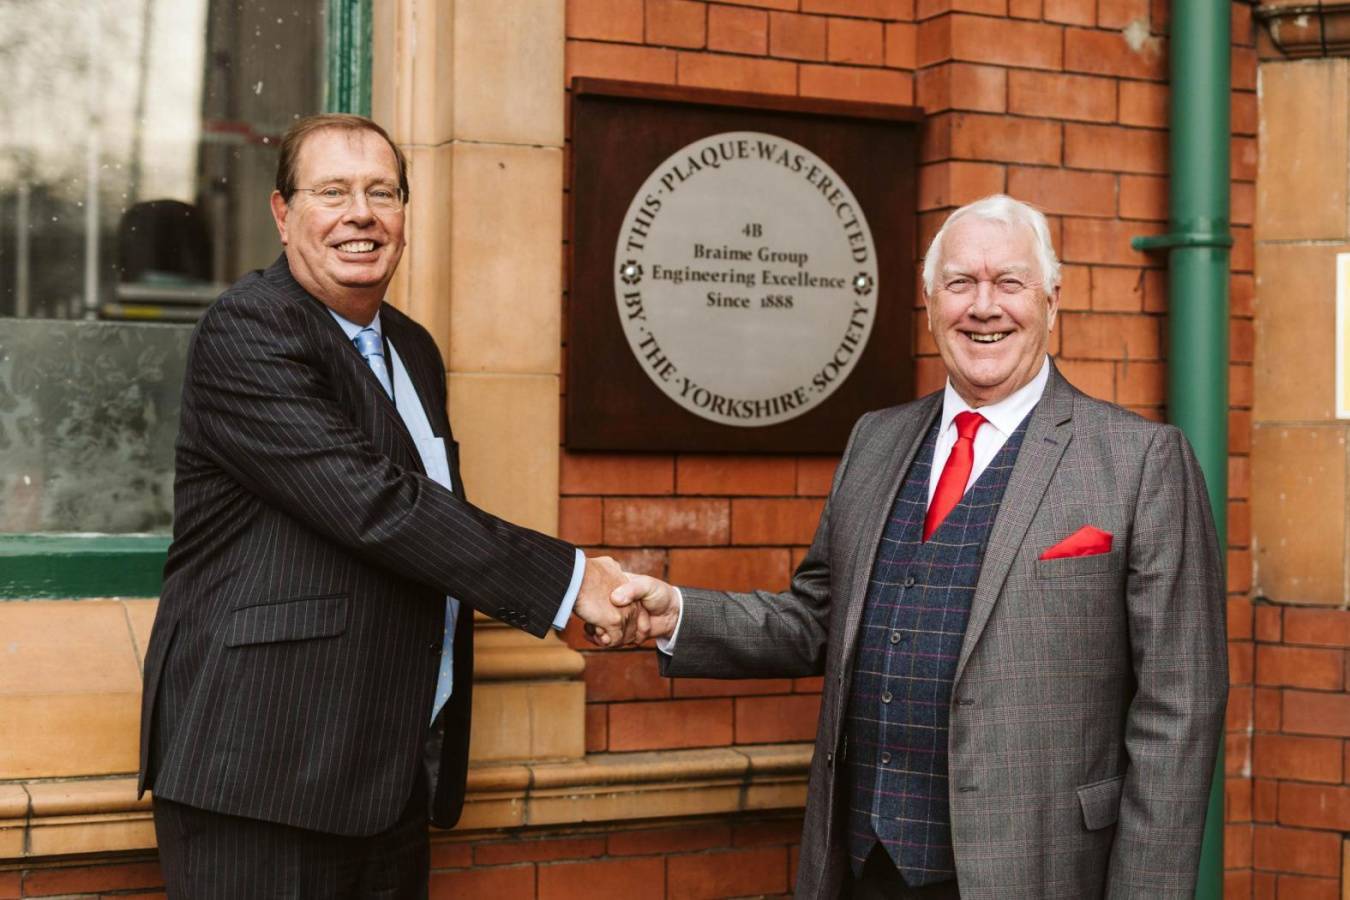 4B Braime Gruppe bekommt Yorkshire Plaque of Engineering Excellence